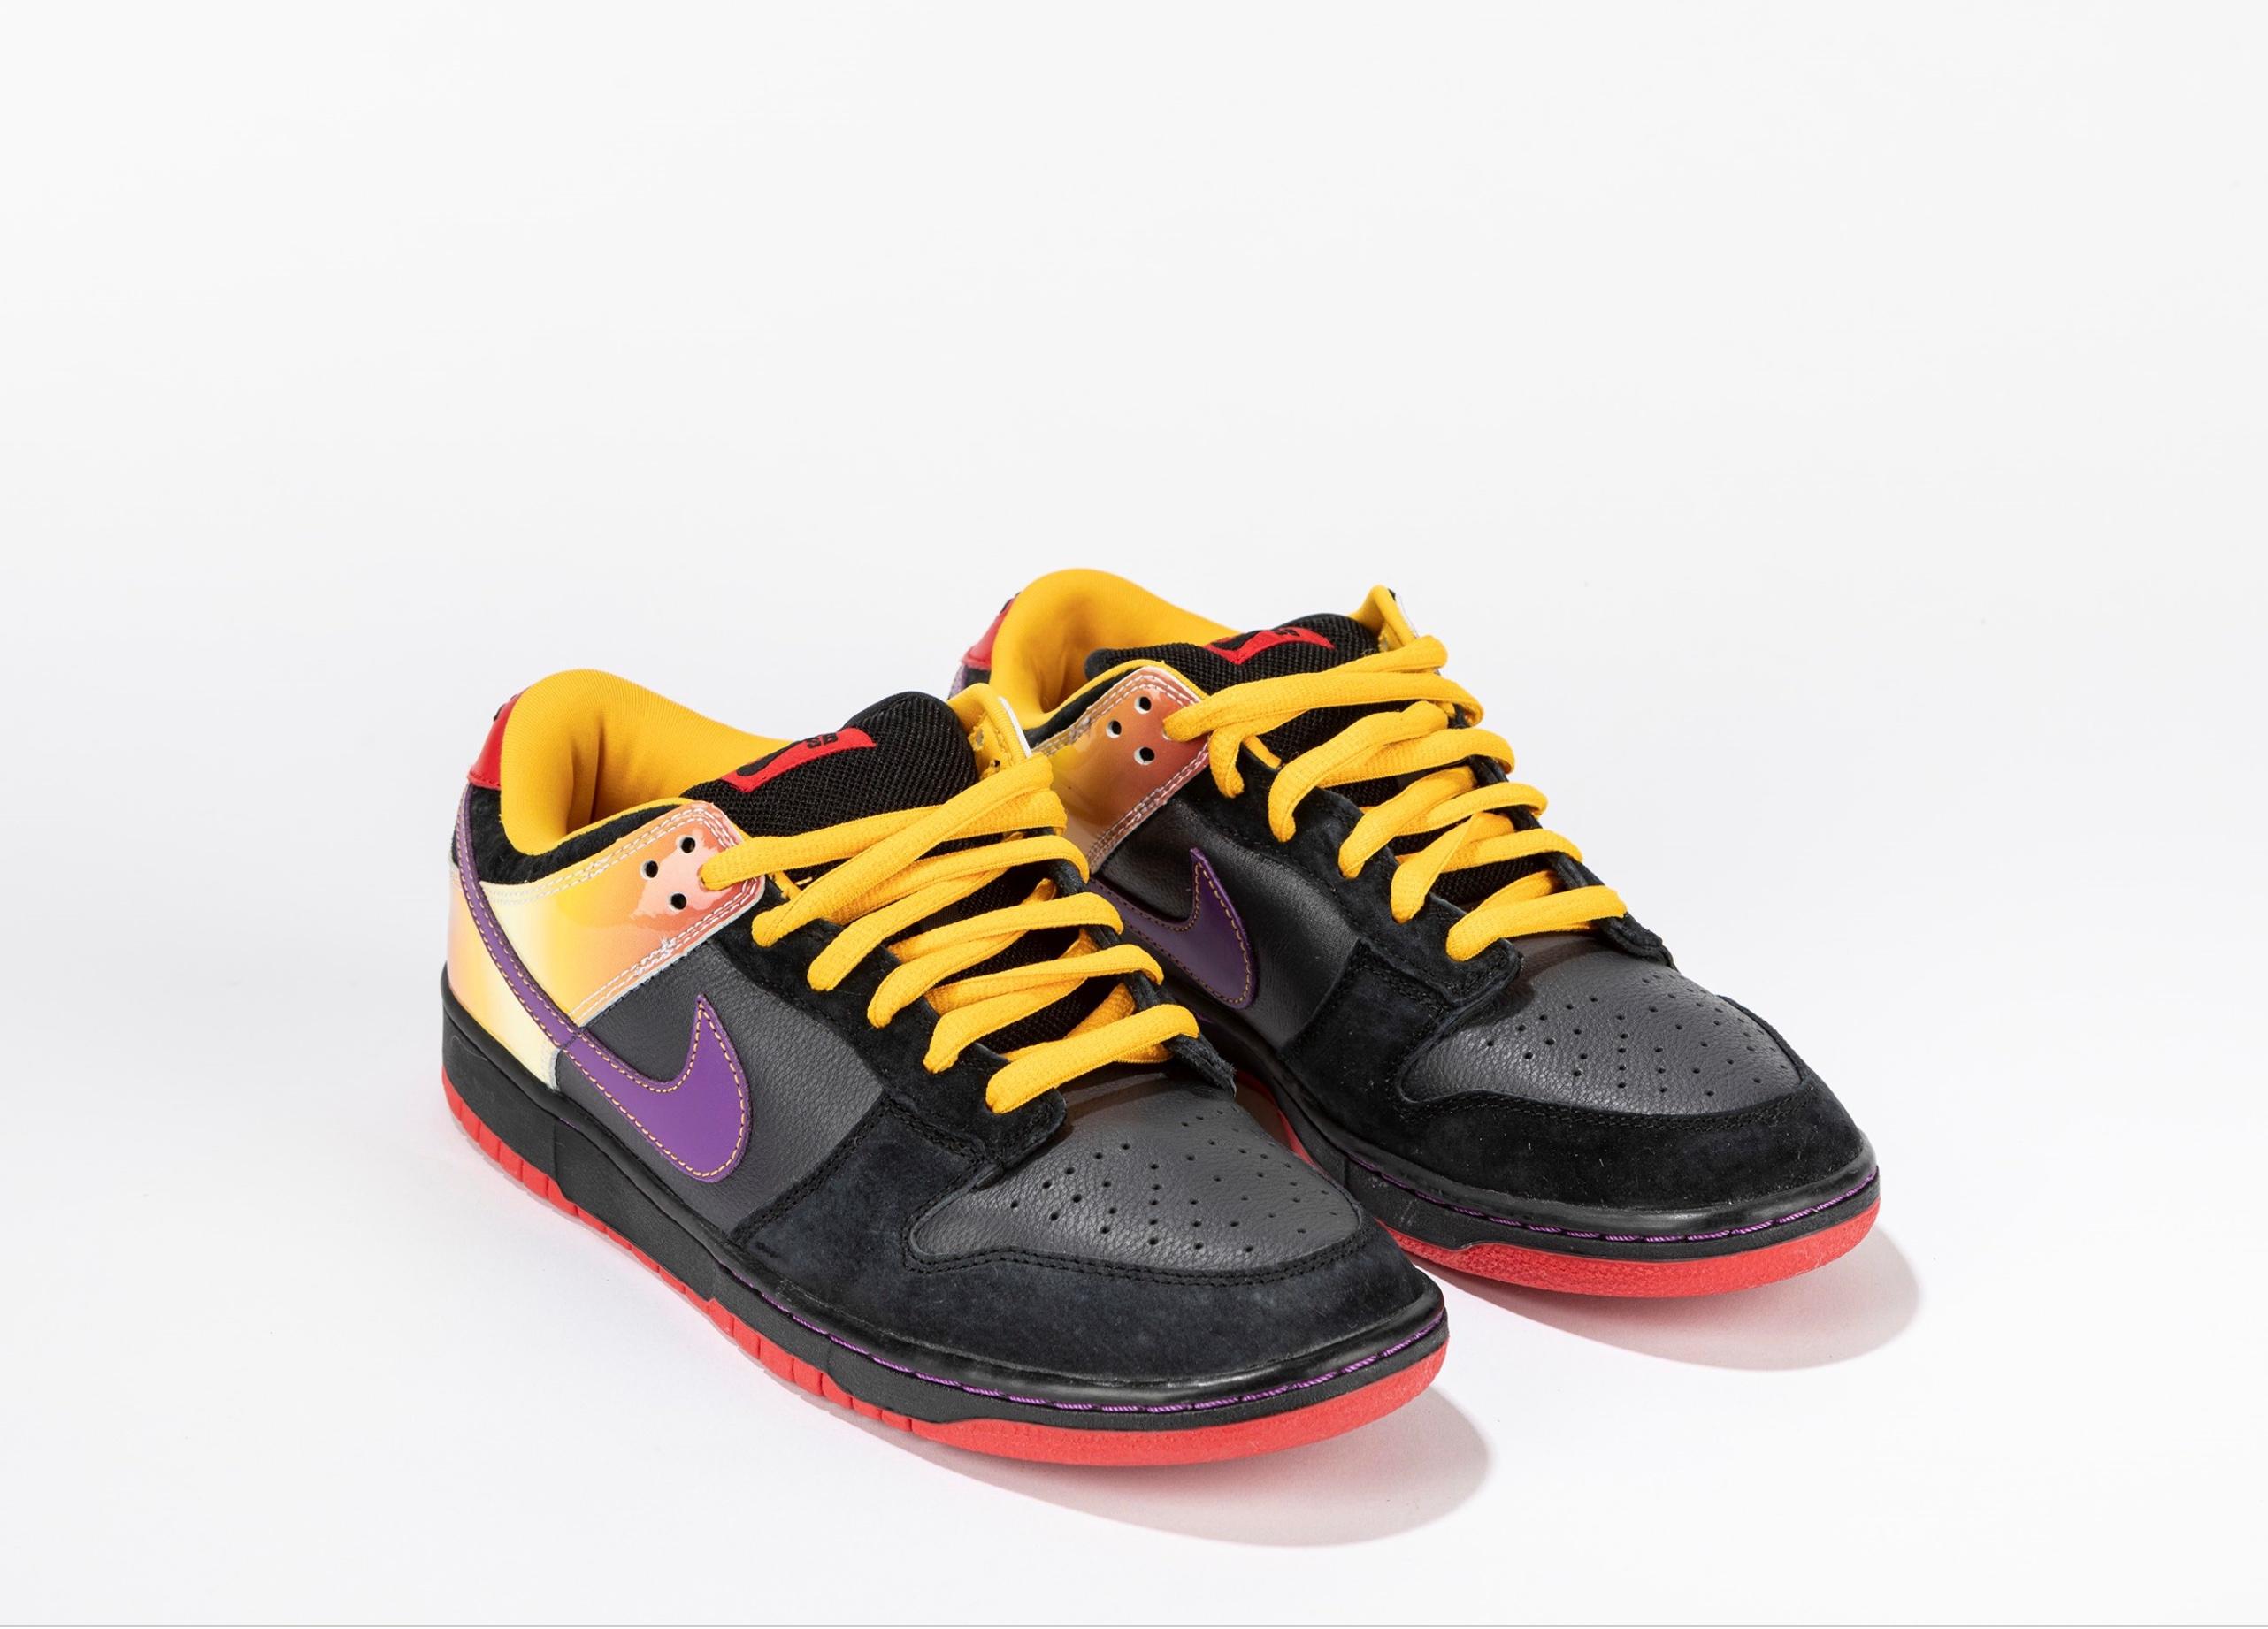 The Nike Dunk SB Low Appetite for Destruction are a limited edition of the classic Nike Dunk SB sneakers. Made in 2018 in collaboration with Guns N' Roses, these shoes feature a black leather upper with colorful themed details inspired by the